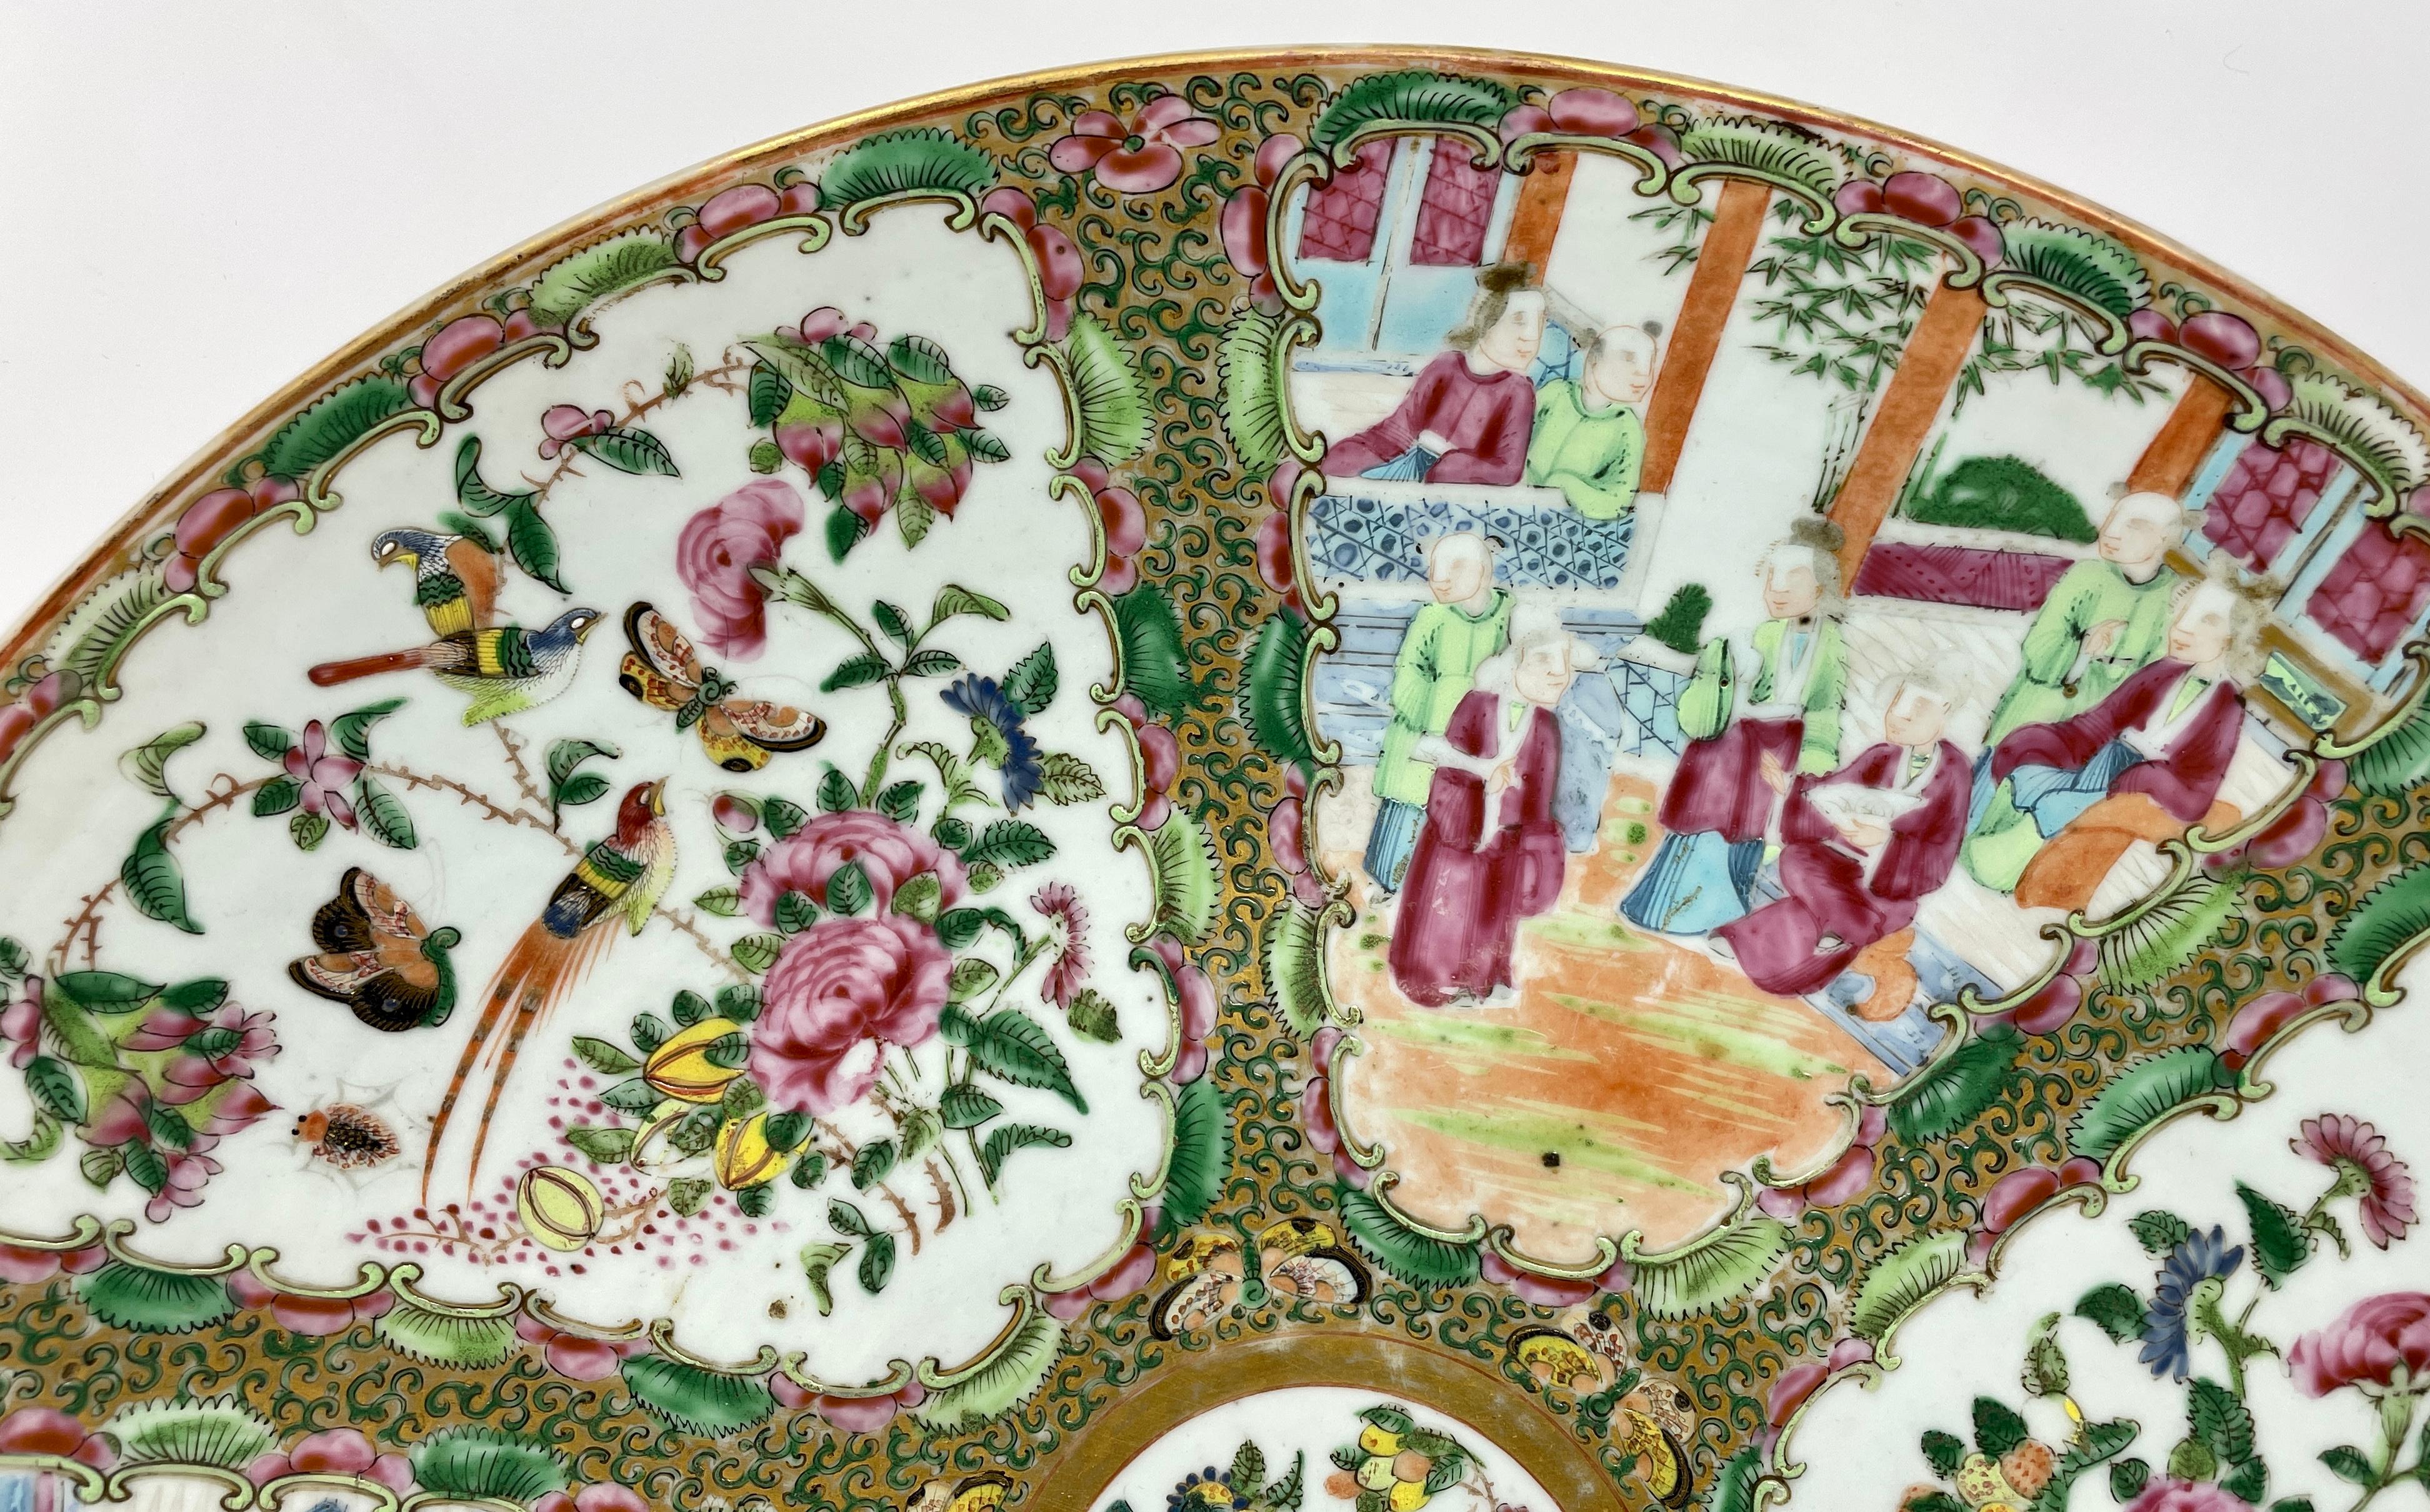 Large Antique Chinese Famille Rose or Rose Medallion porcelain charger plate, circa 1880s-1890s.